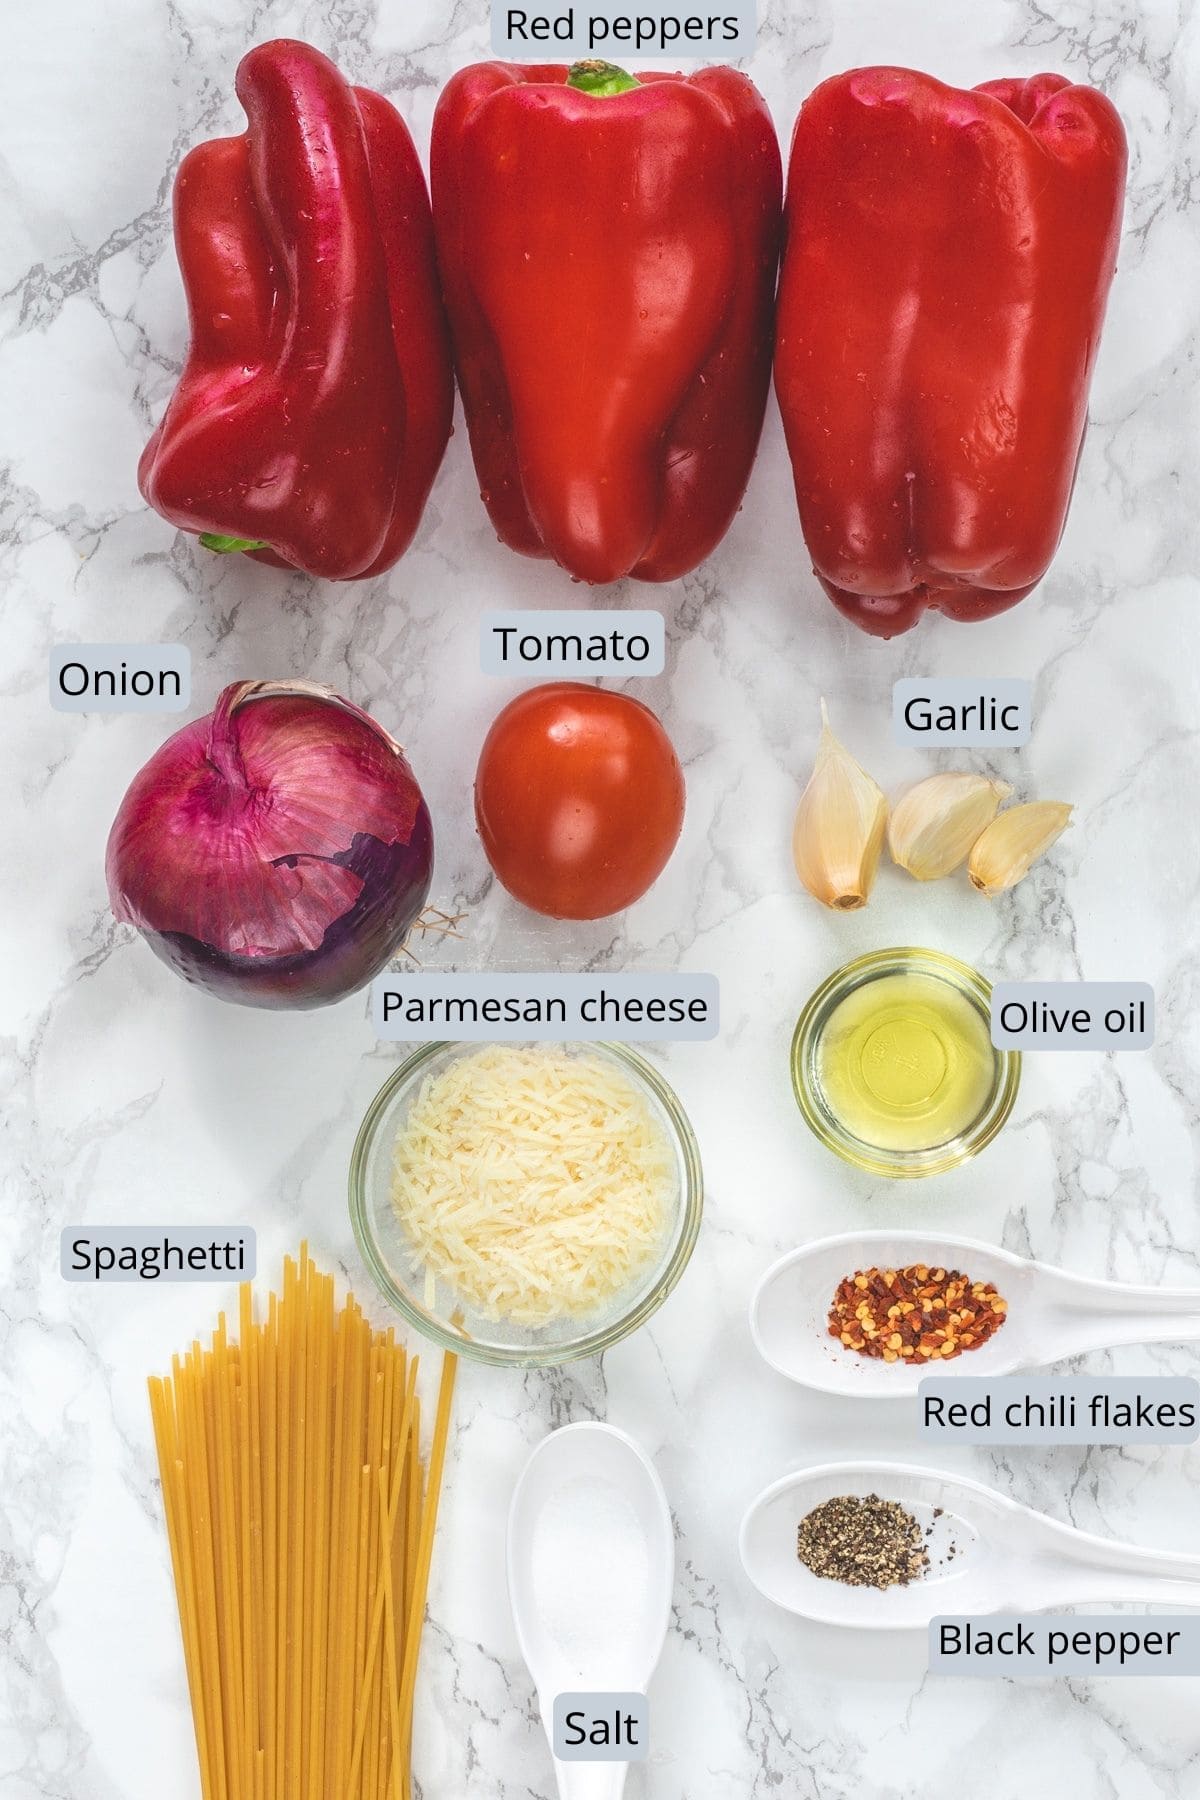 Roasted red pepper pasta ingredients with labels.